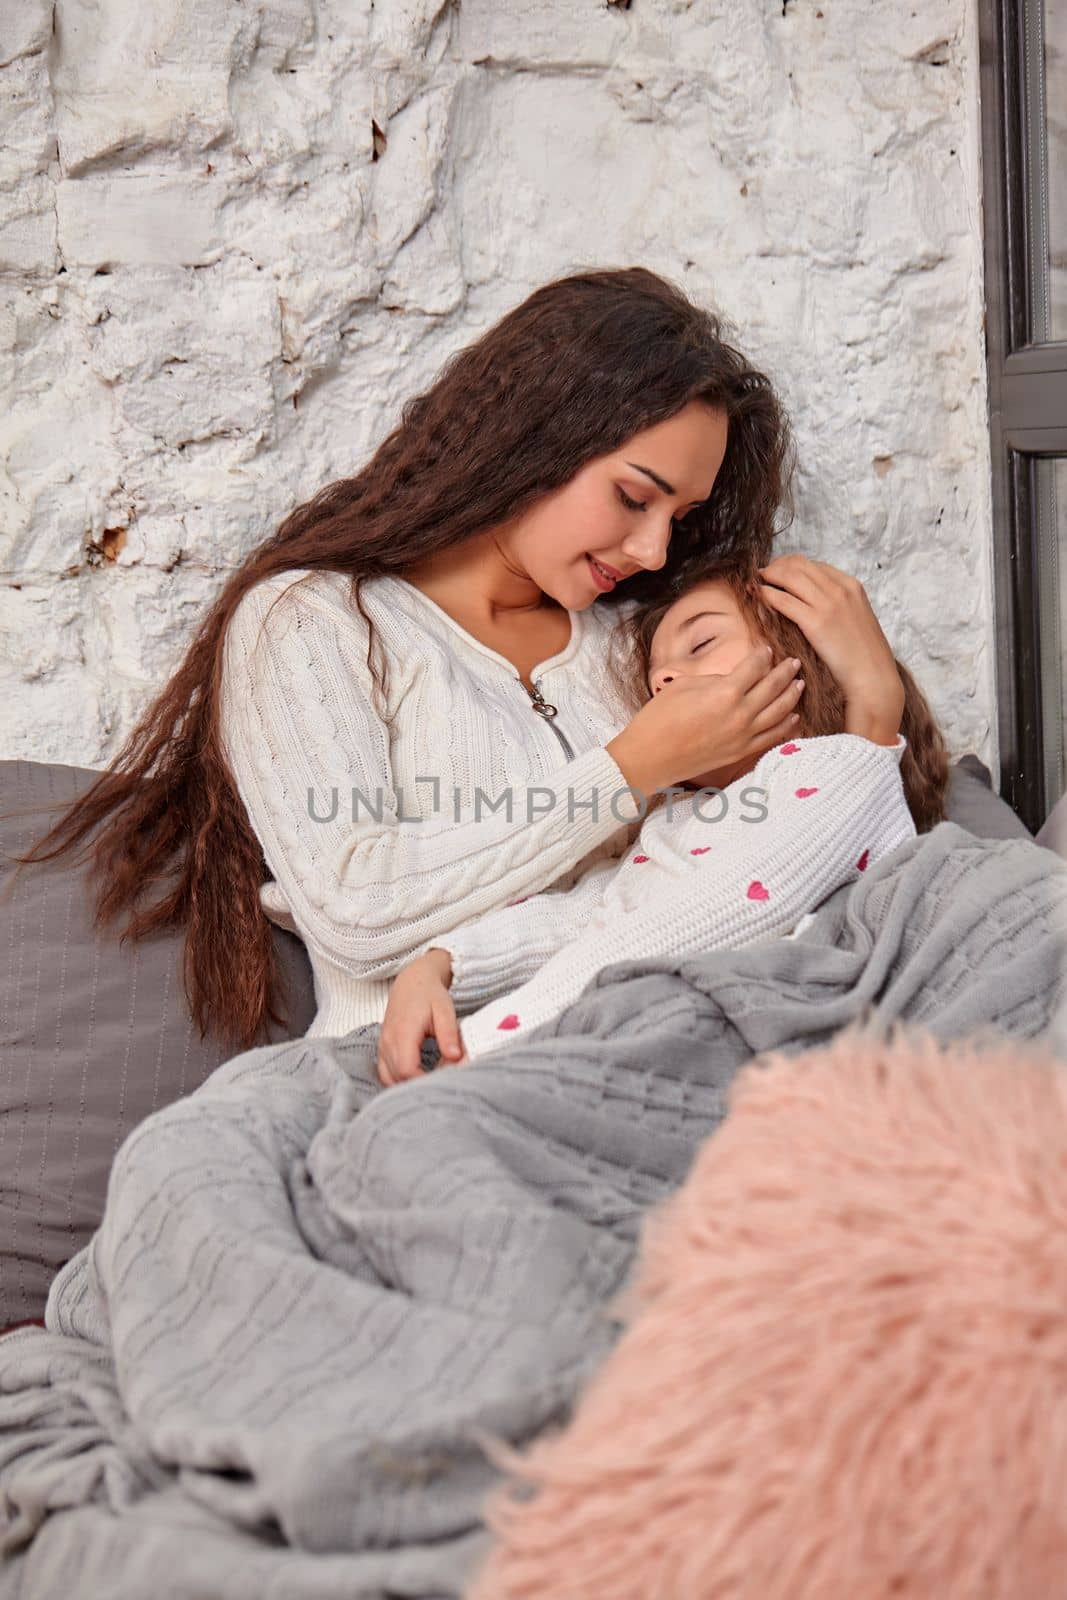 Mother and daughter sitting on sill near window in room. The daughter sleeping on mother's hands